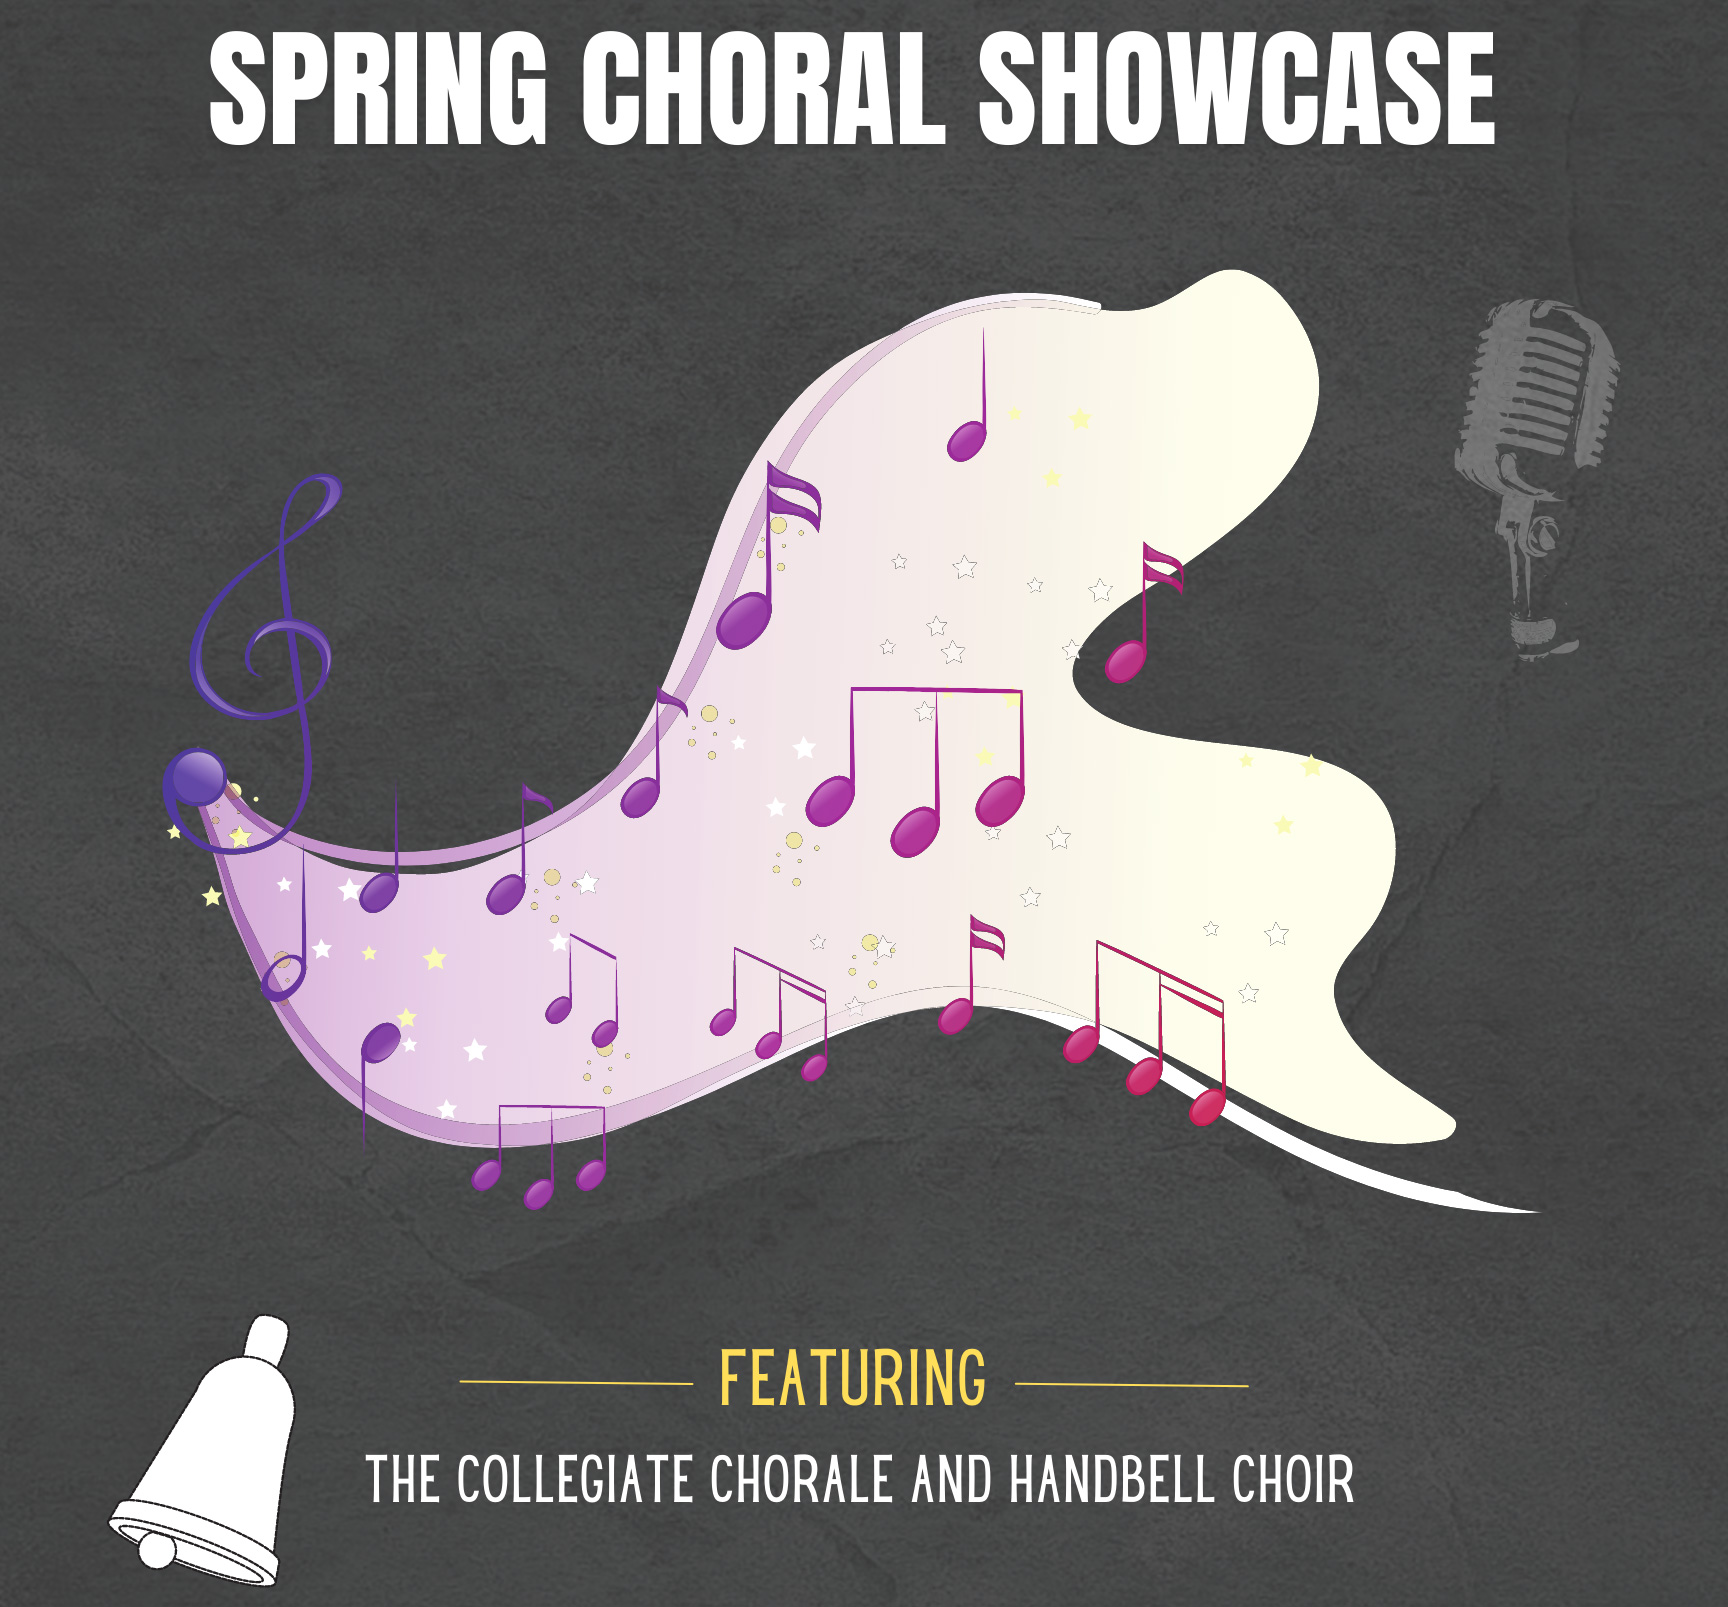 Spring Choral Showcase Promotional Graphic with music notes on a gray background